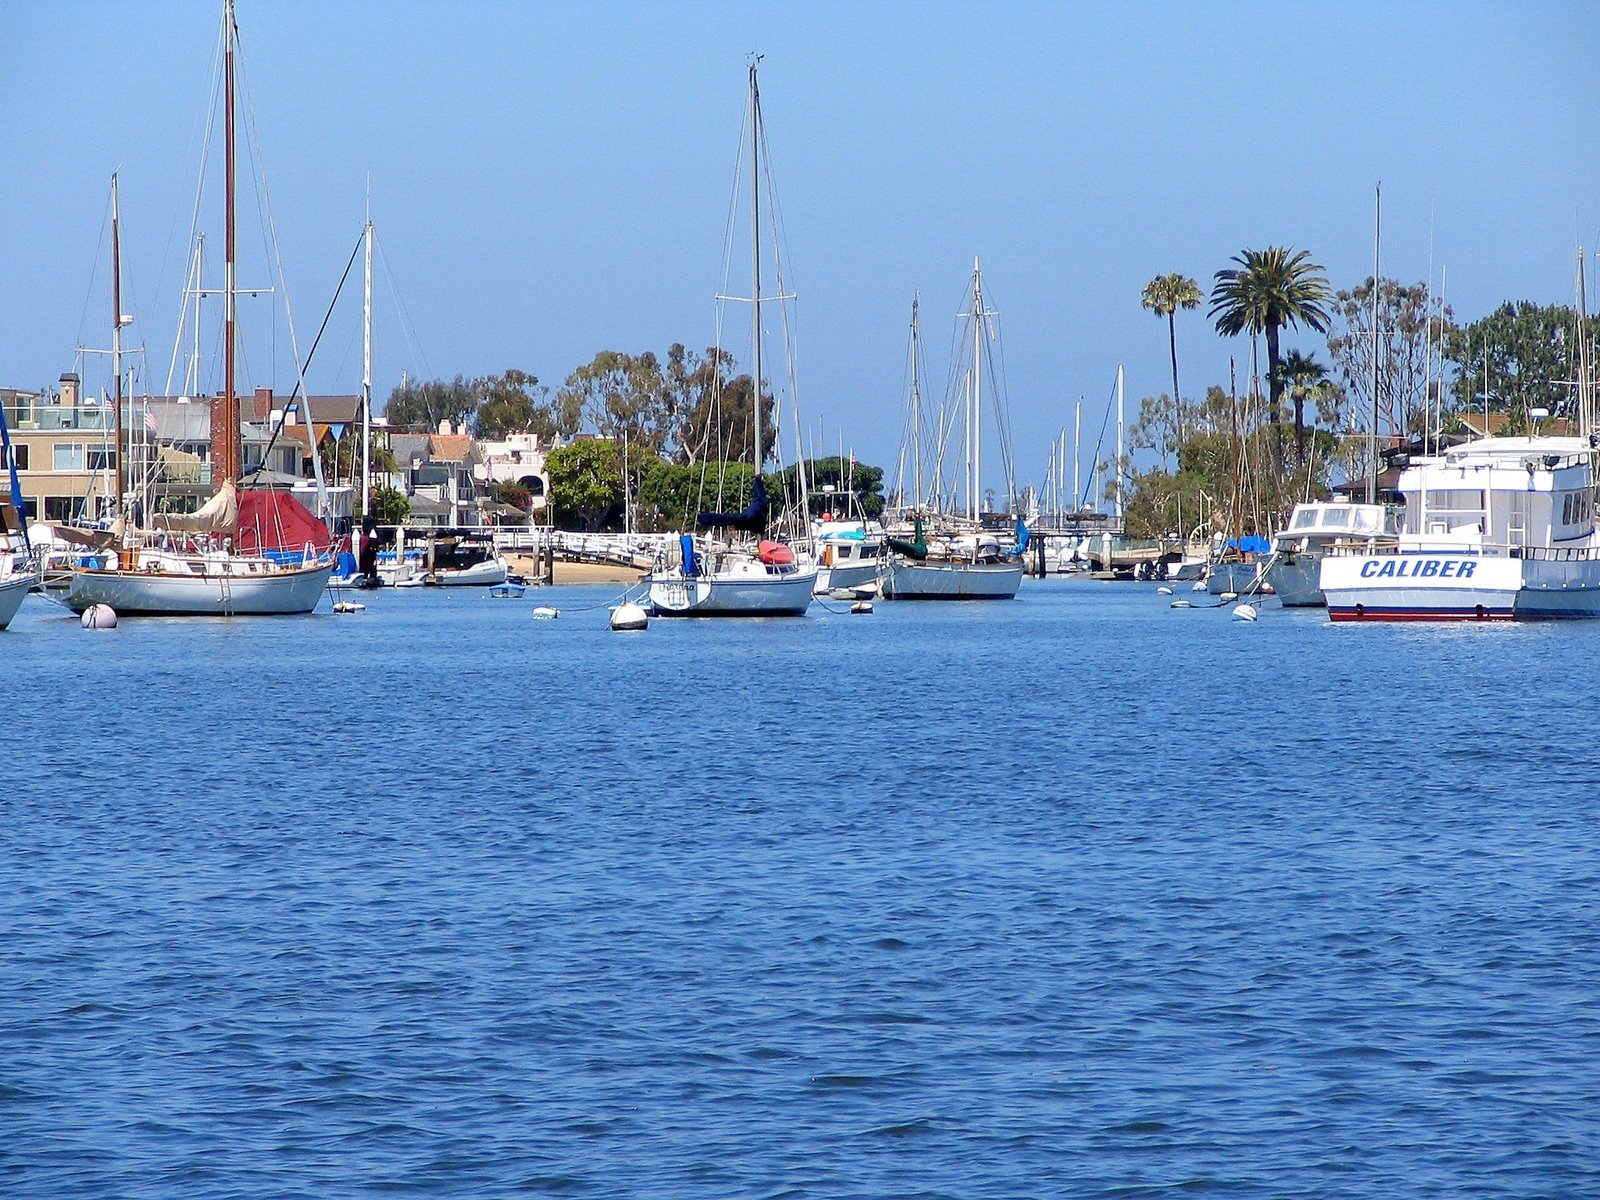 there are many sailboats docked on the water